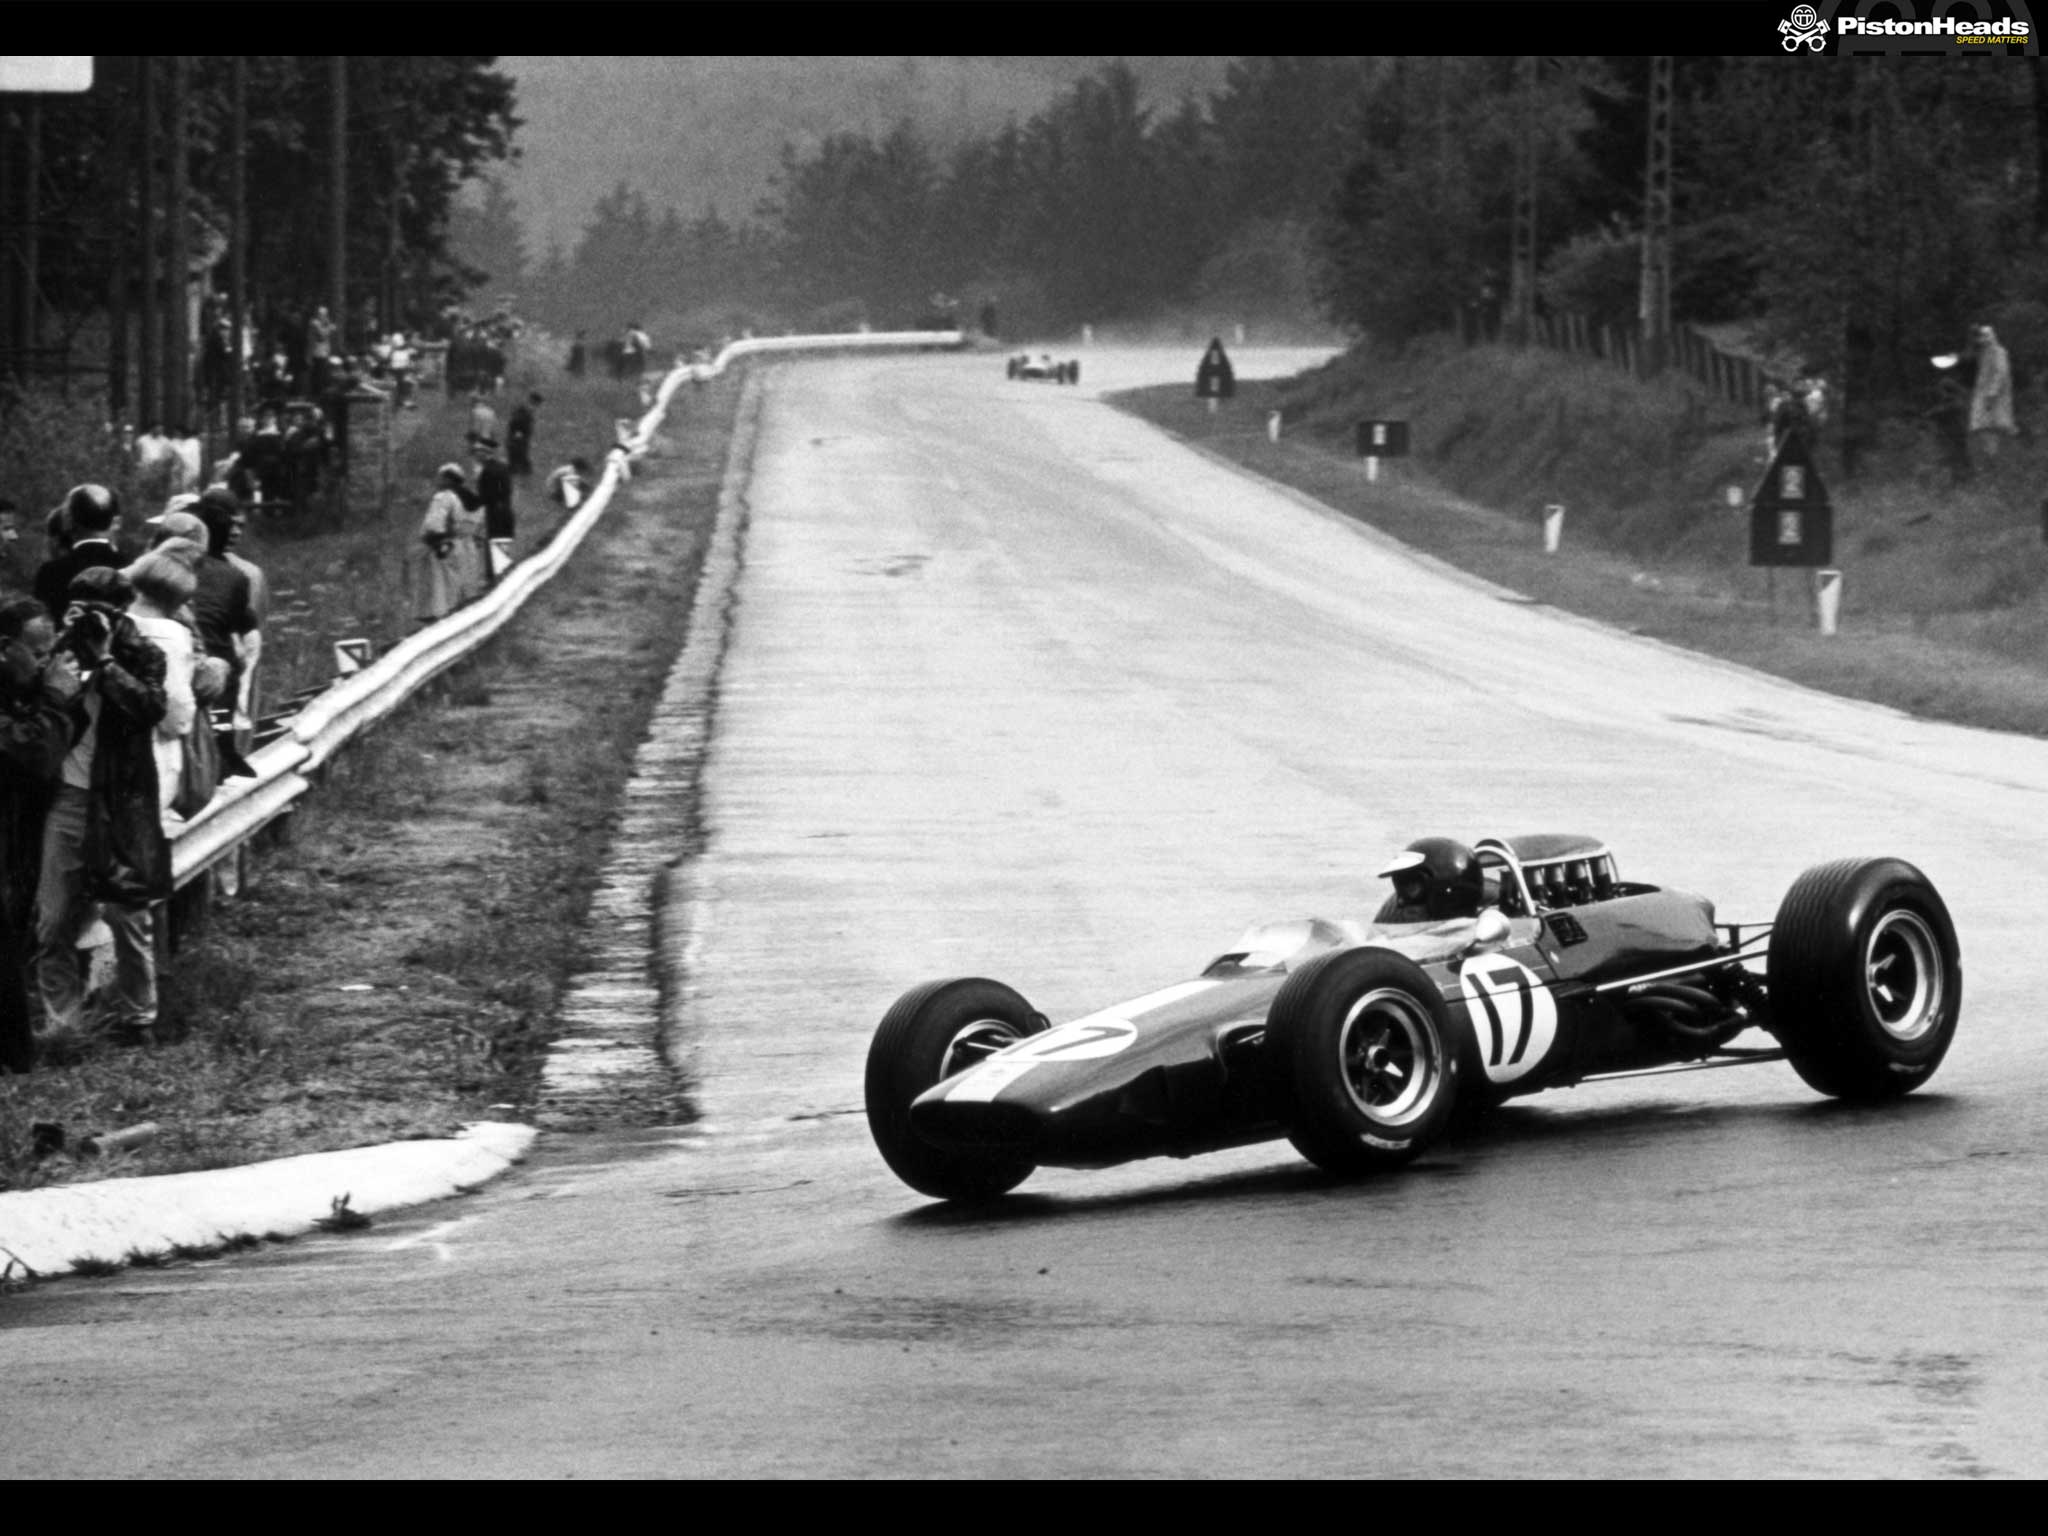 Jim Clark At Spa Pic Of The Week Pistonheads